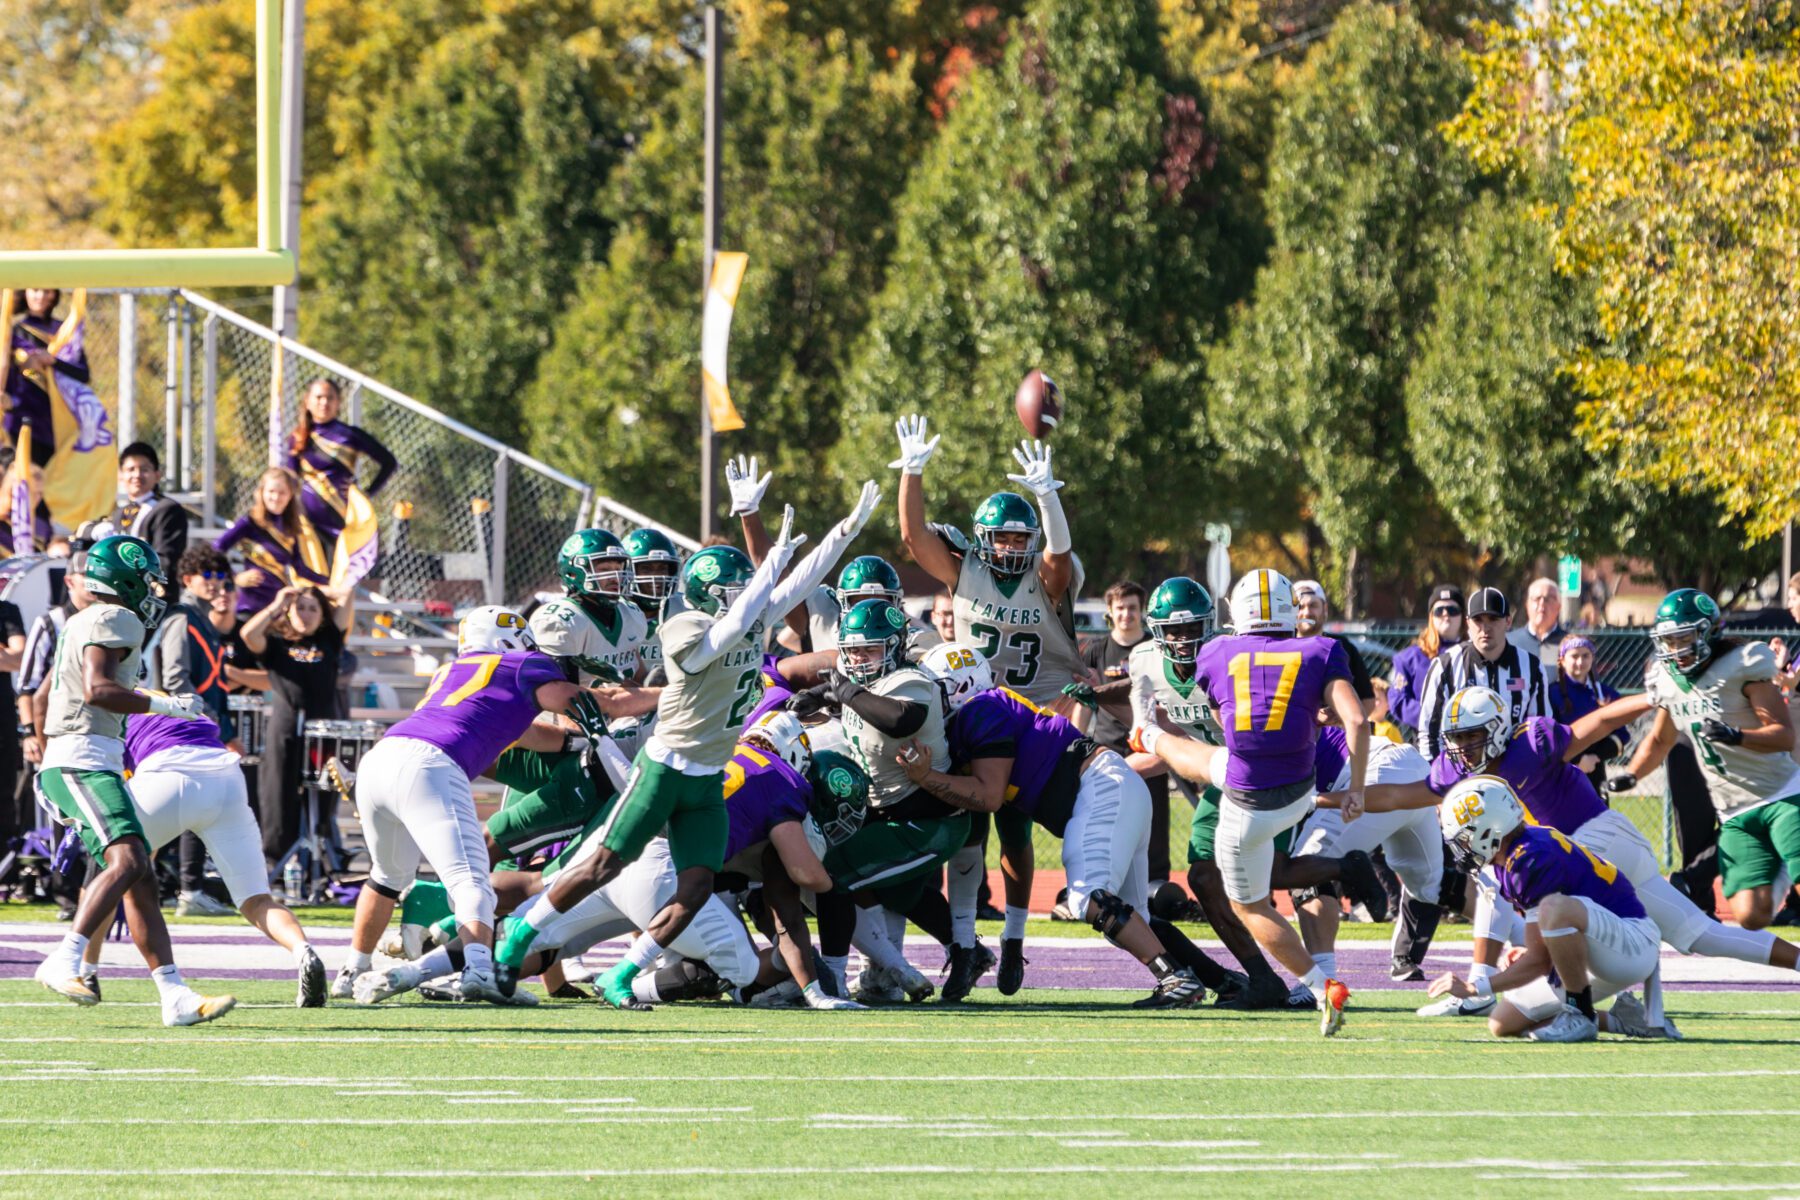 Olivet kicks a field goal while opposing team tries to block.